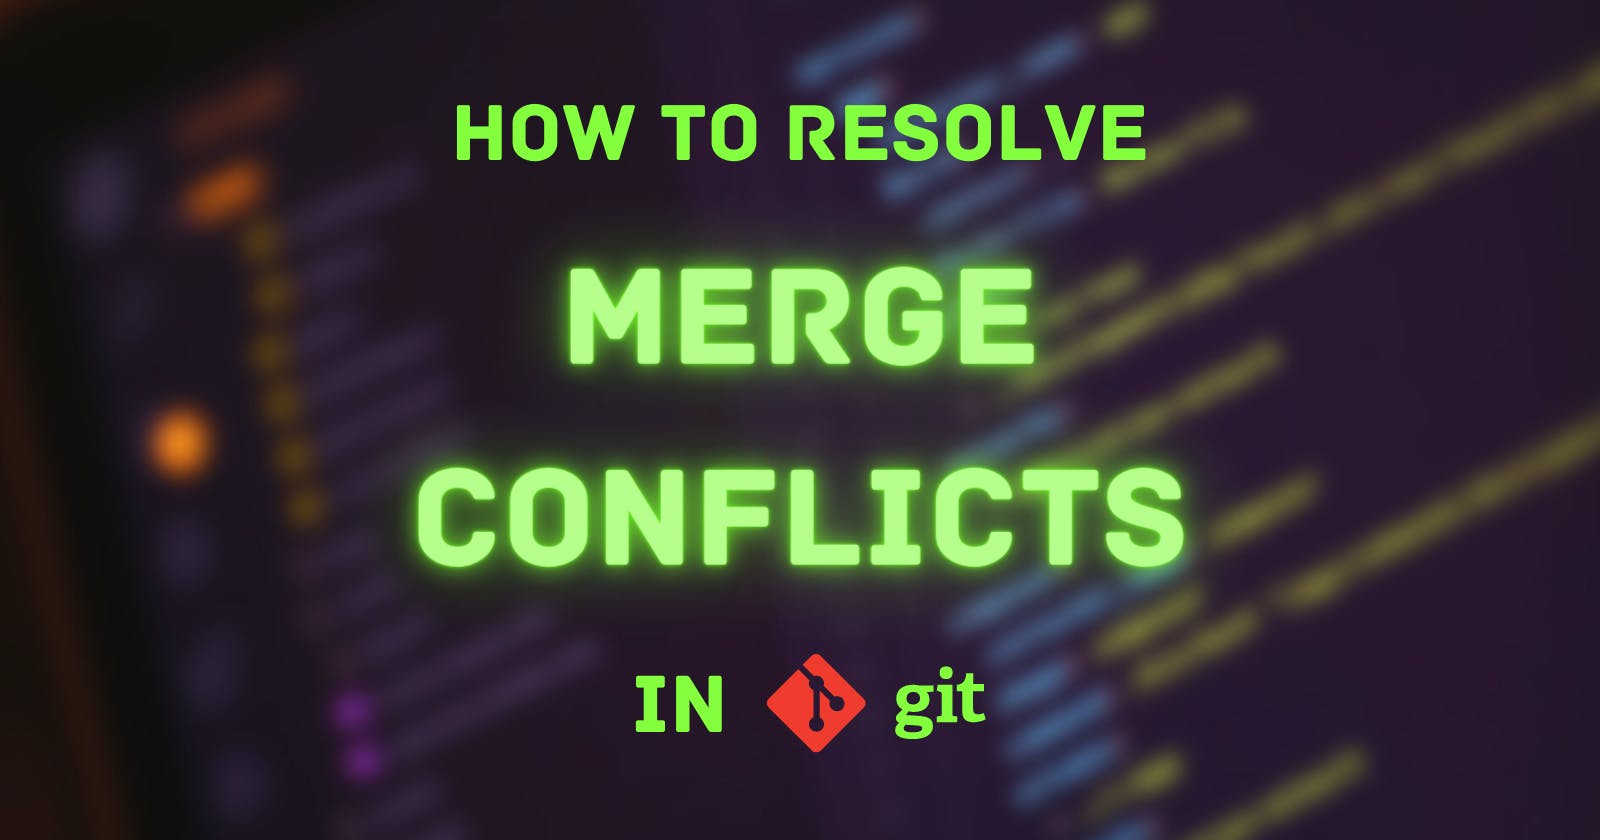 What are merge conflicts in Git and how to resolve them?